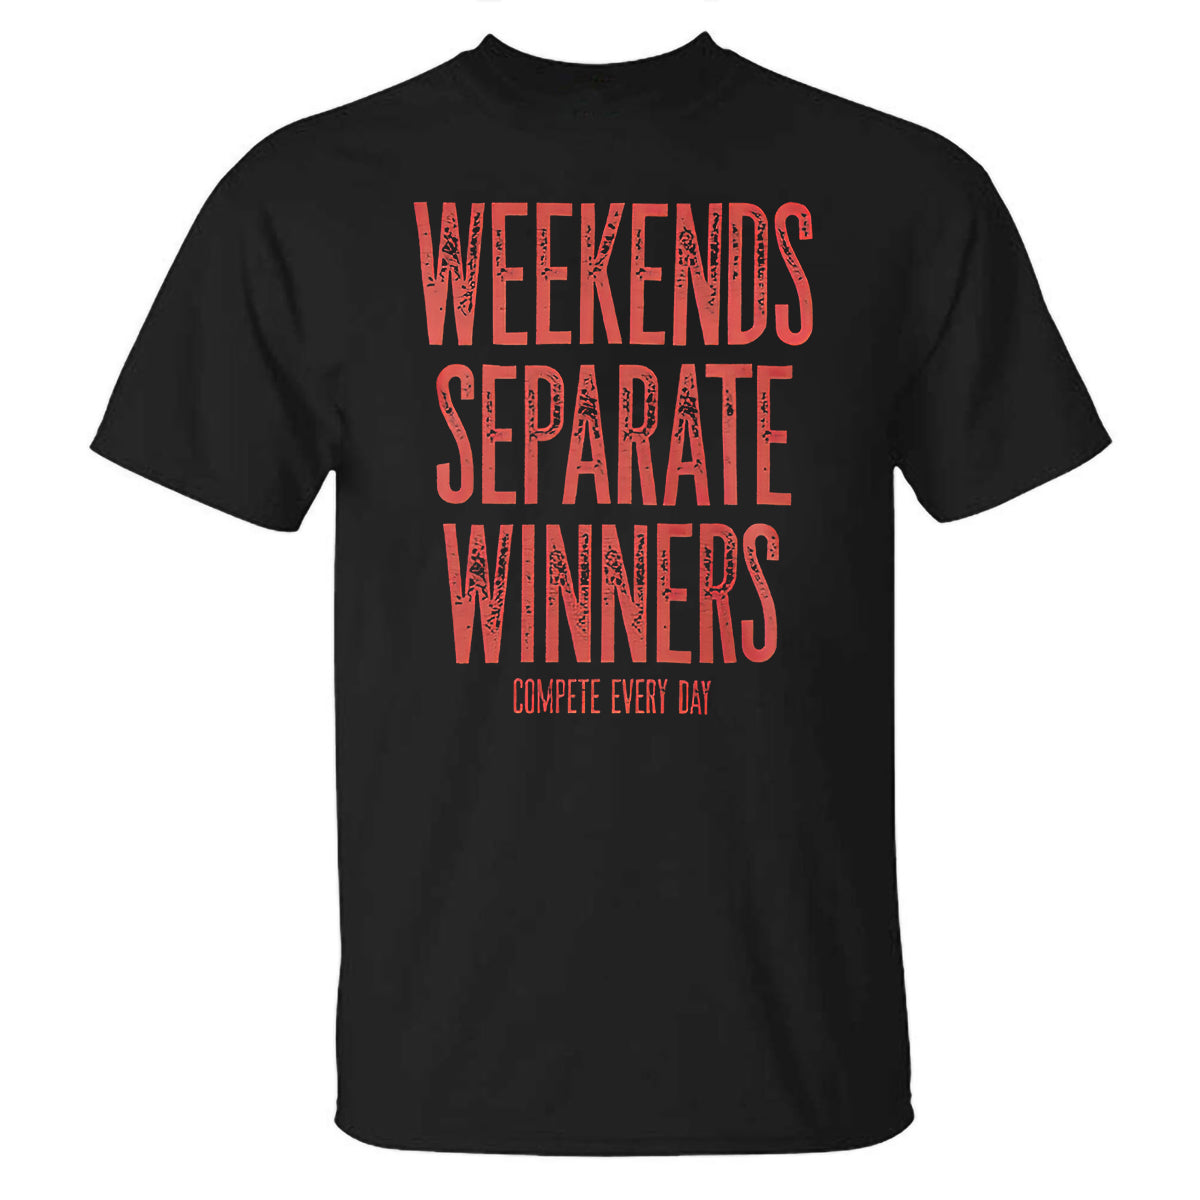 Weekends Separate Winners Compete Every Day Printed T-shirt